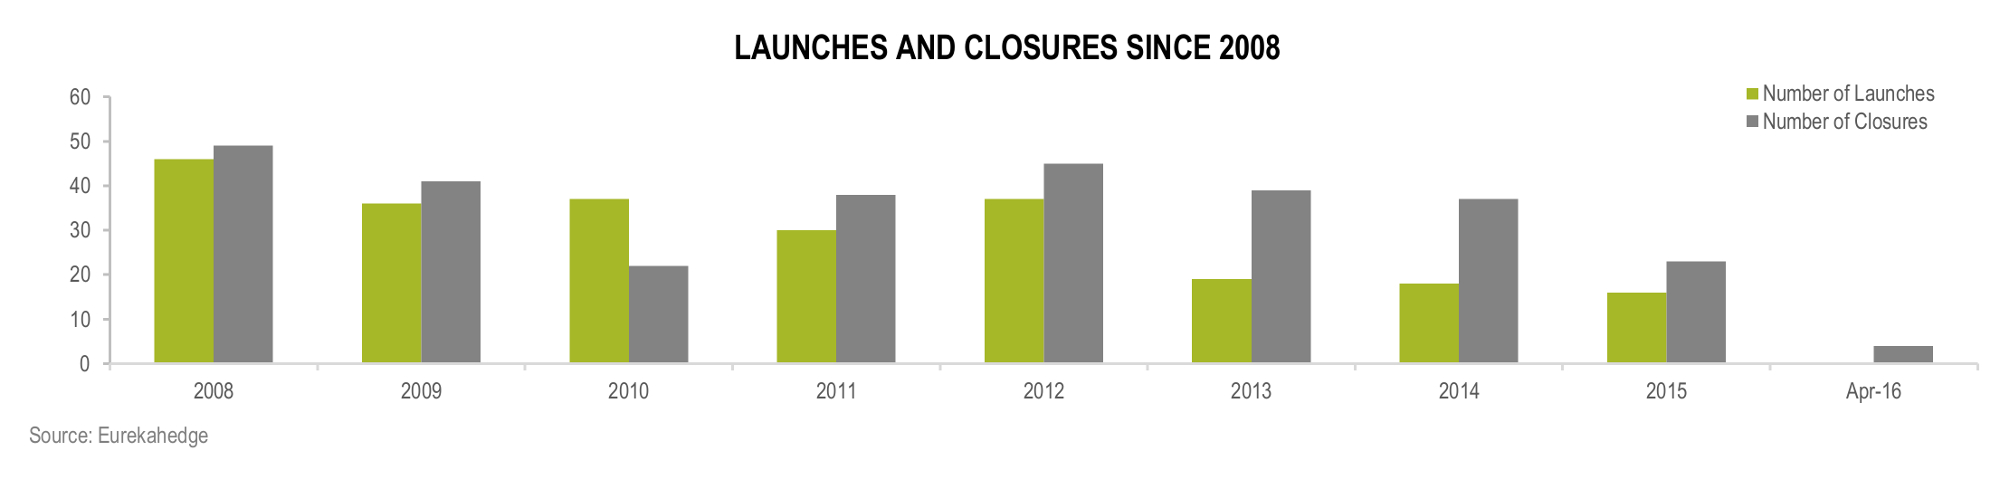 Latin American Hedge Funds Infographic June 2016 - Fund launches and closures since 2008